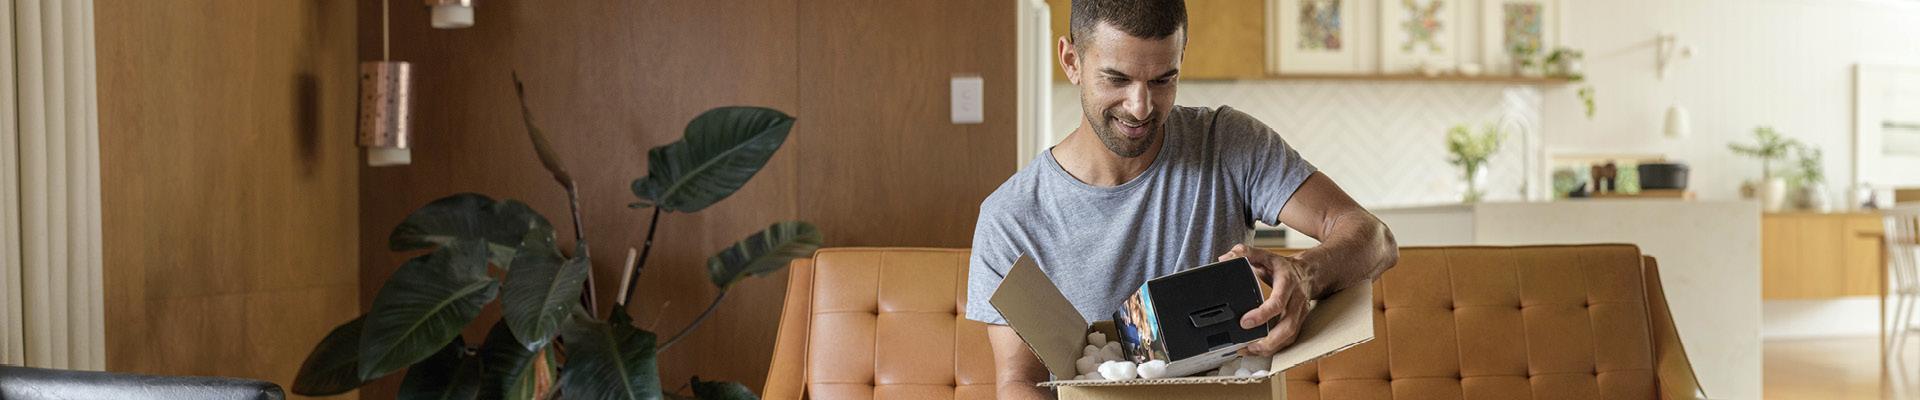 Man sitting on couch opening box